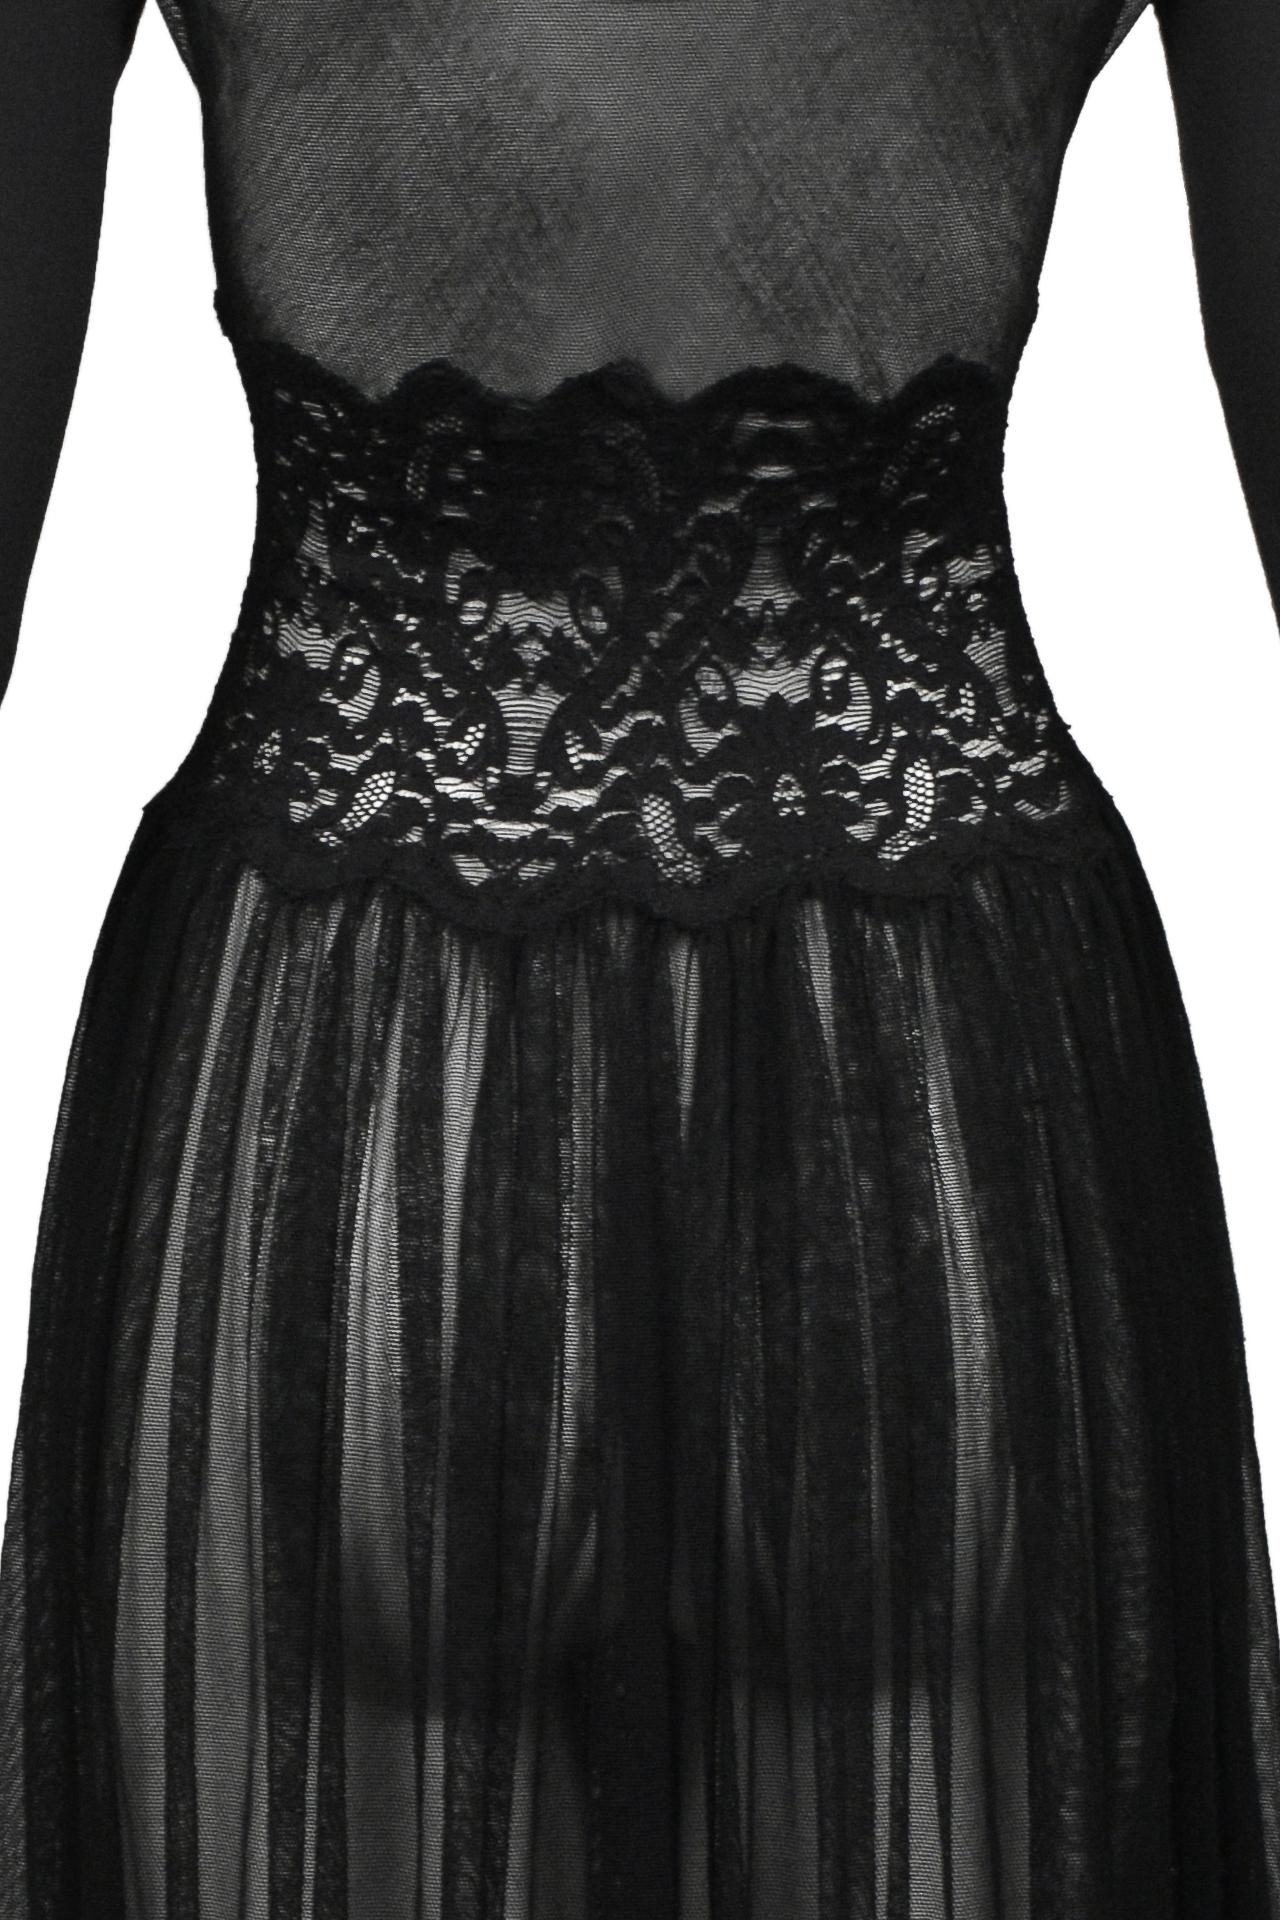 Jean Paul Gaultier Black Mesh, Lace And Tulle Ballet Dress 1988 For Sale 1